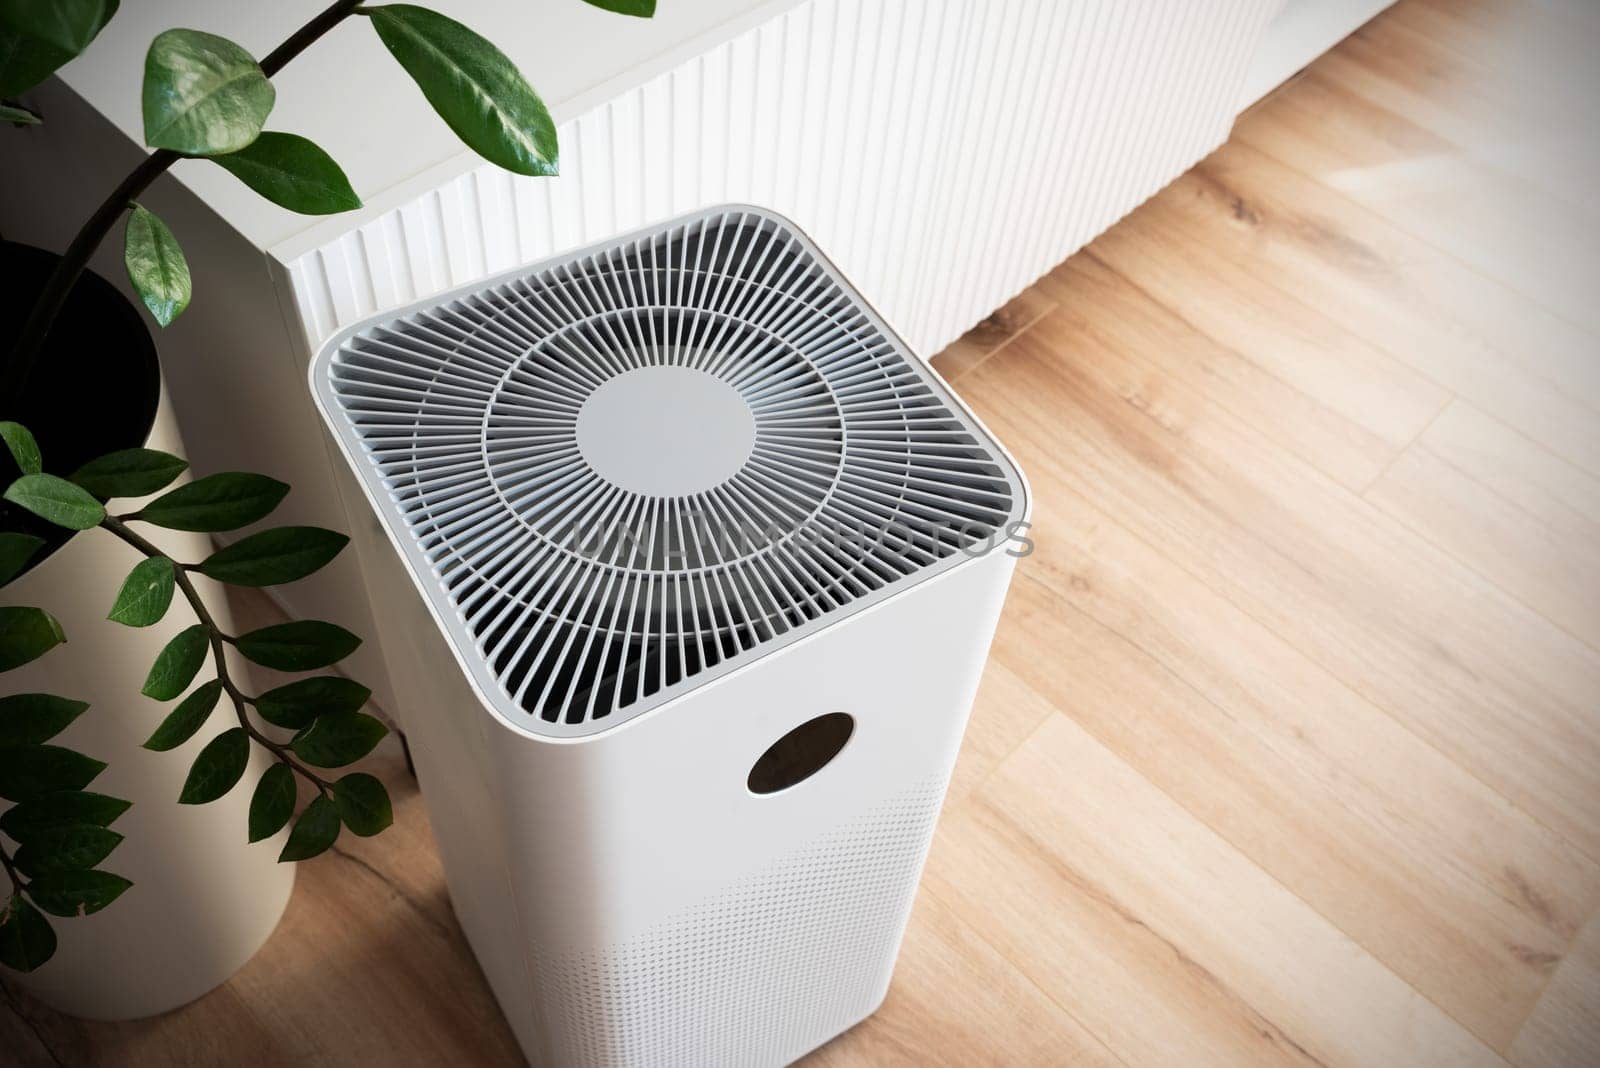 Air purifier in home. Air fresh concept. Smart home devices